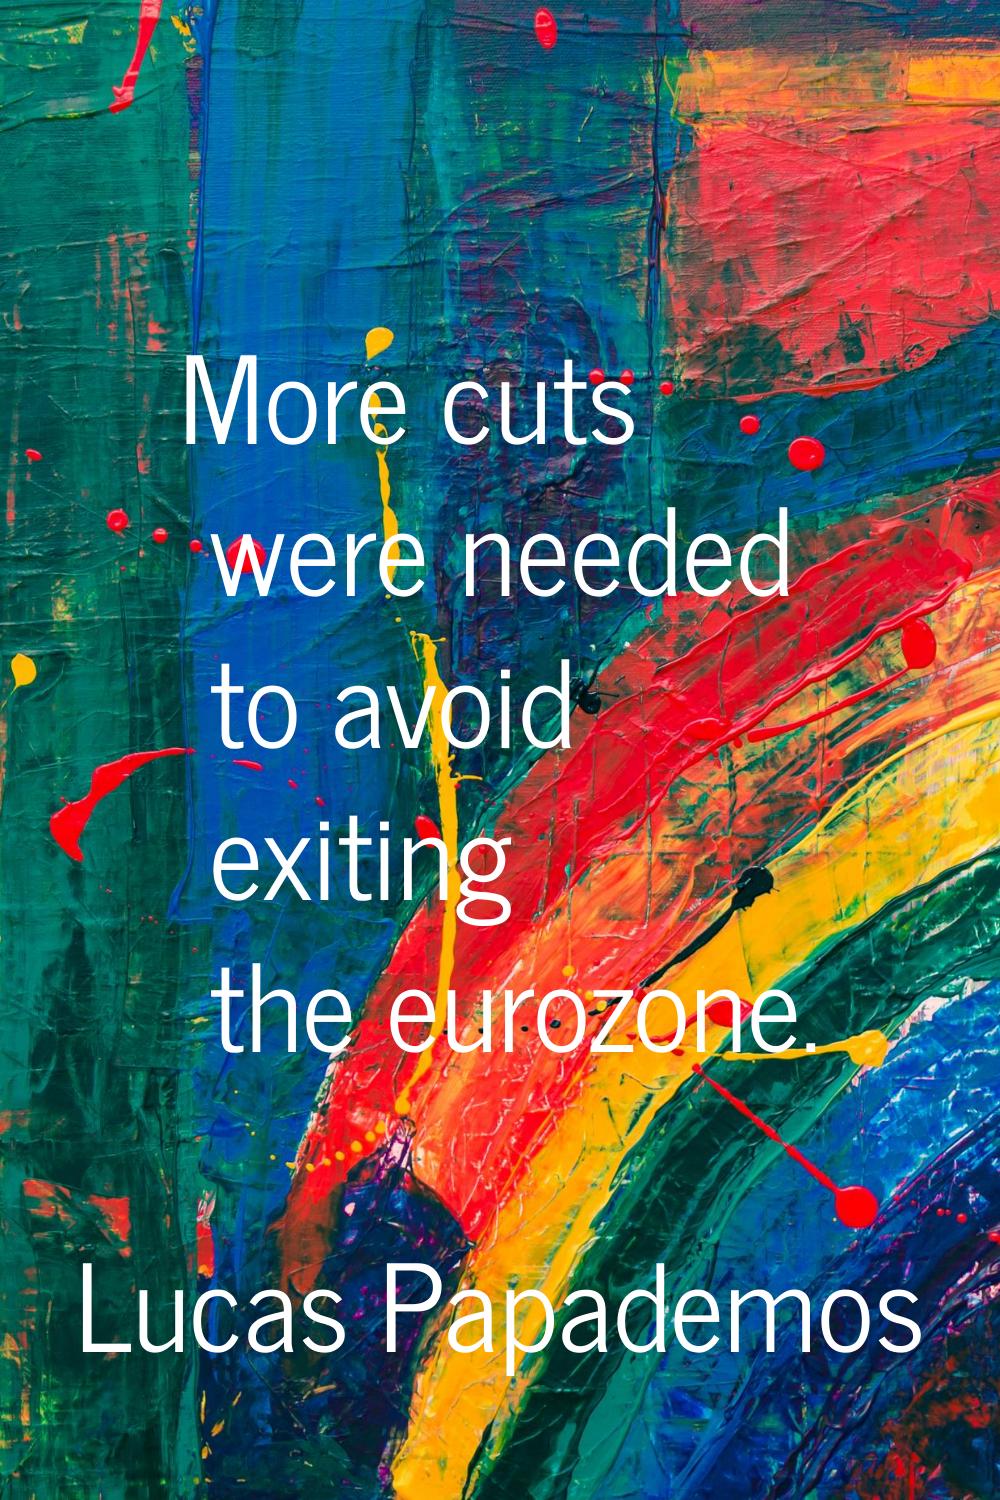 More cuts were needed to avoid exiting the eurozone.